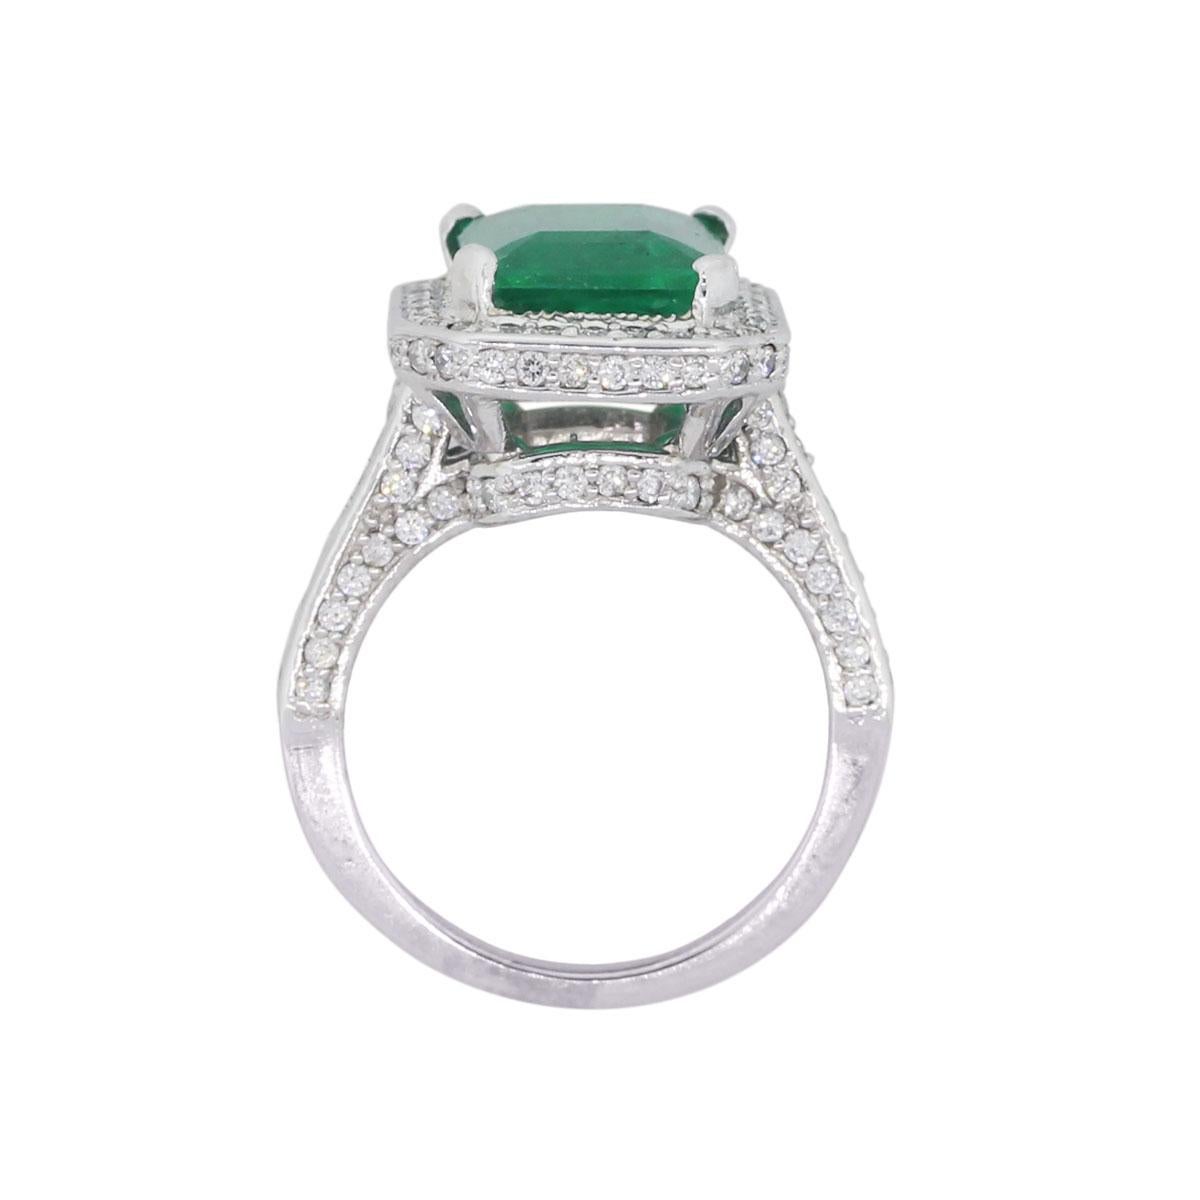 Material: 14k white gold
Gemstone Details: Emerald cut emerald approximately 4.16ct.
Additional Diamond Details: Approximately 1.90ctw of round brilliant diamonds, diamonds are H/I in color, SI in clarity
Ring Size: 6.75 (can be sized)
Measurements: